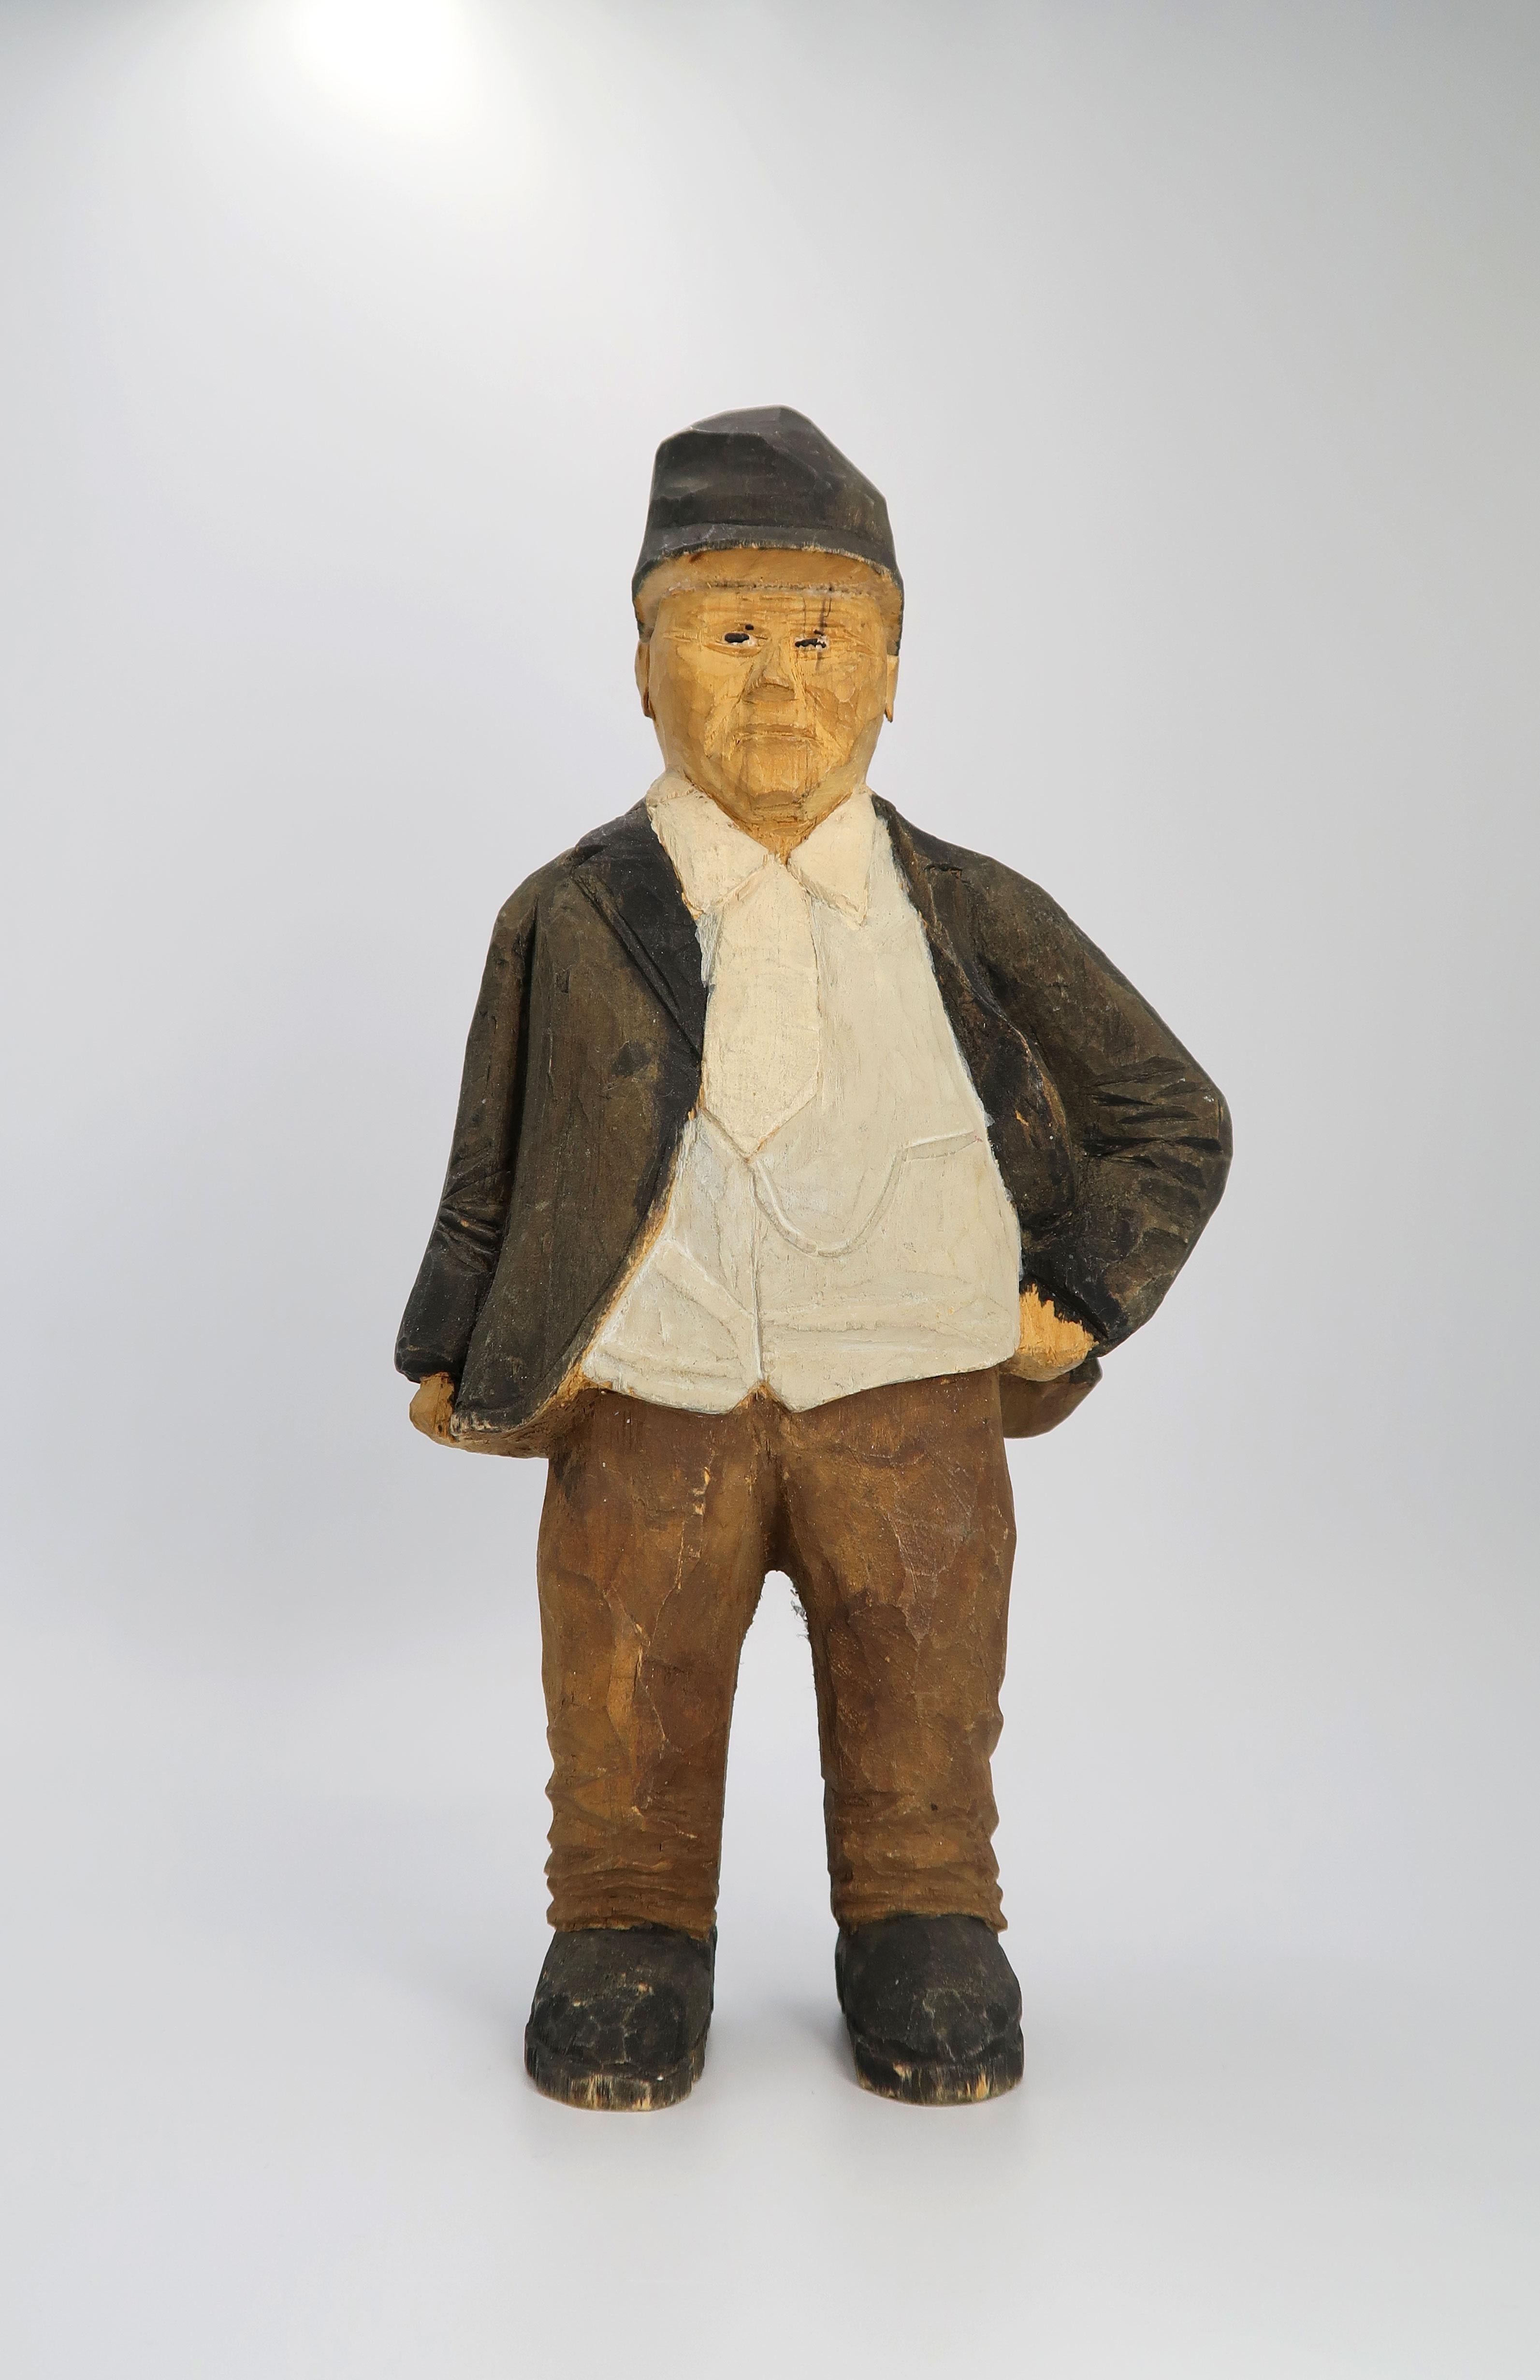 Expressive, rustic Swedish folklore midcentury wooden decorative sculpture of an older man in a traditional Swedish outfit. He stands leaning on one leg with a hand in one side as if waiting, and wears a white shirt, dark jacket, brown pants and a